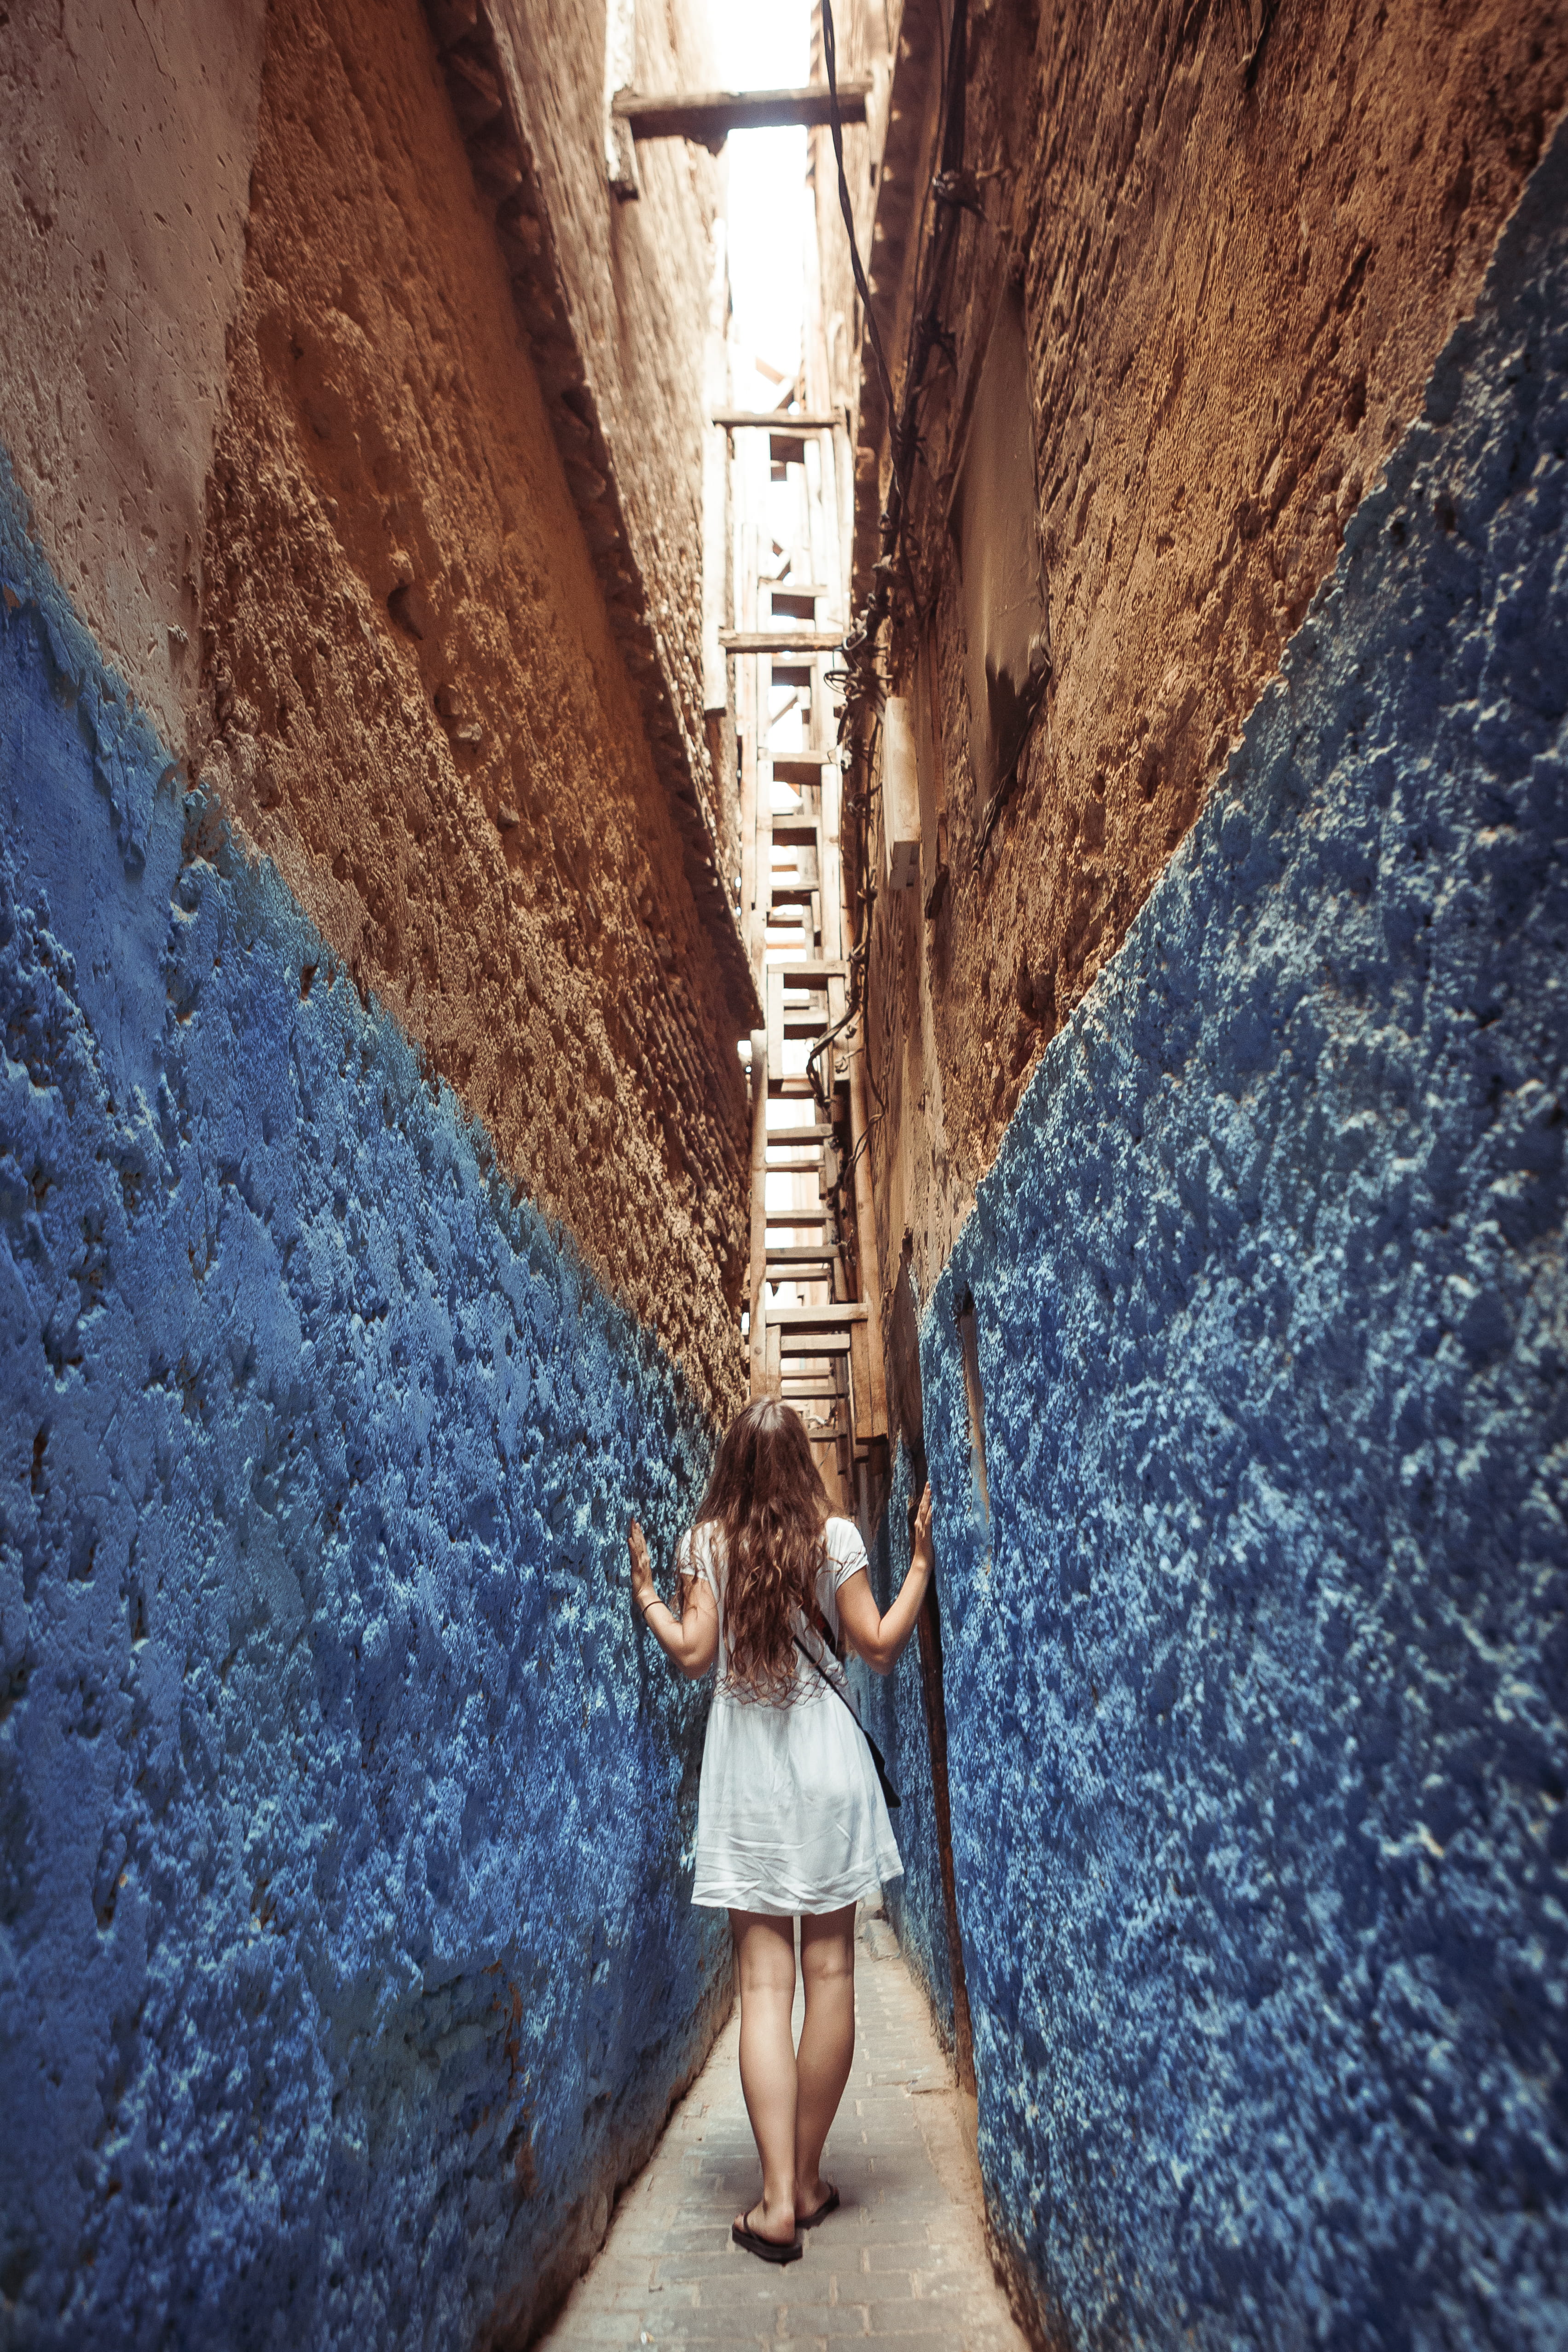 morocco, fes, alley, alleyway, trip, travel, girl, arabic, one person